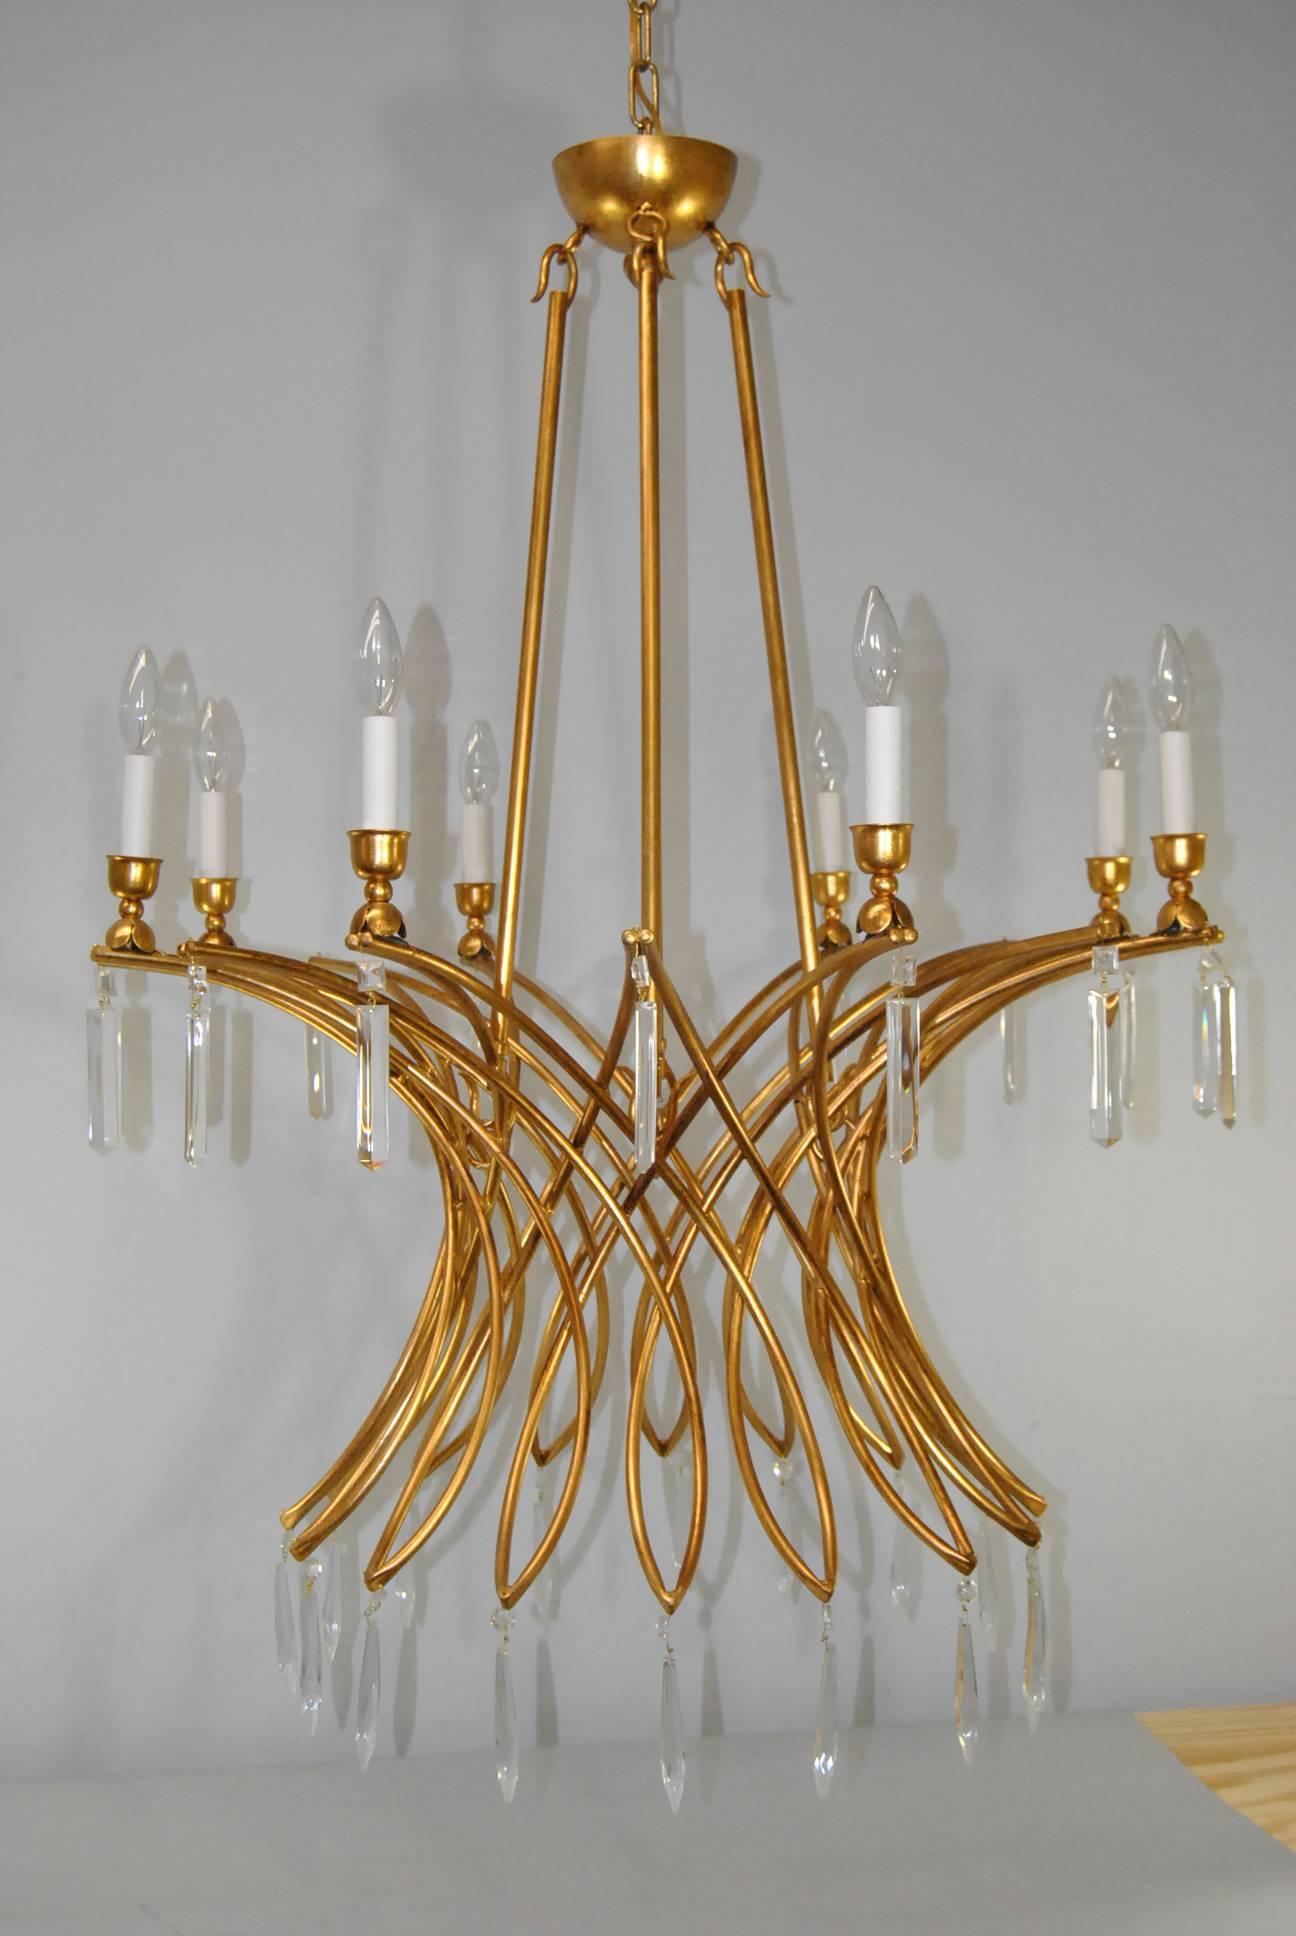 A dramatic large-scale Italian eight-arm chandelier in a gold finish. This large chandelier has eight arms in an intersecting elliptical pattern. Cut and polished prisms hang from the top and bottom of each arm. The arms are attached to the crown by